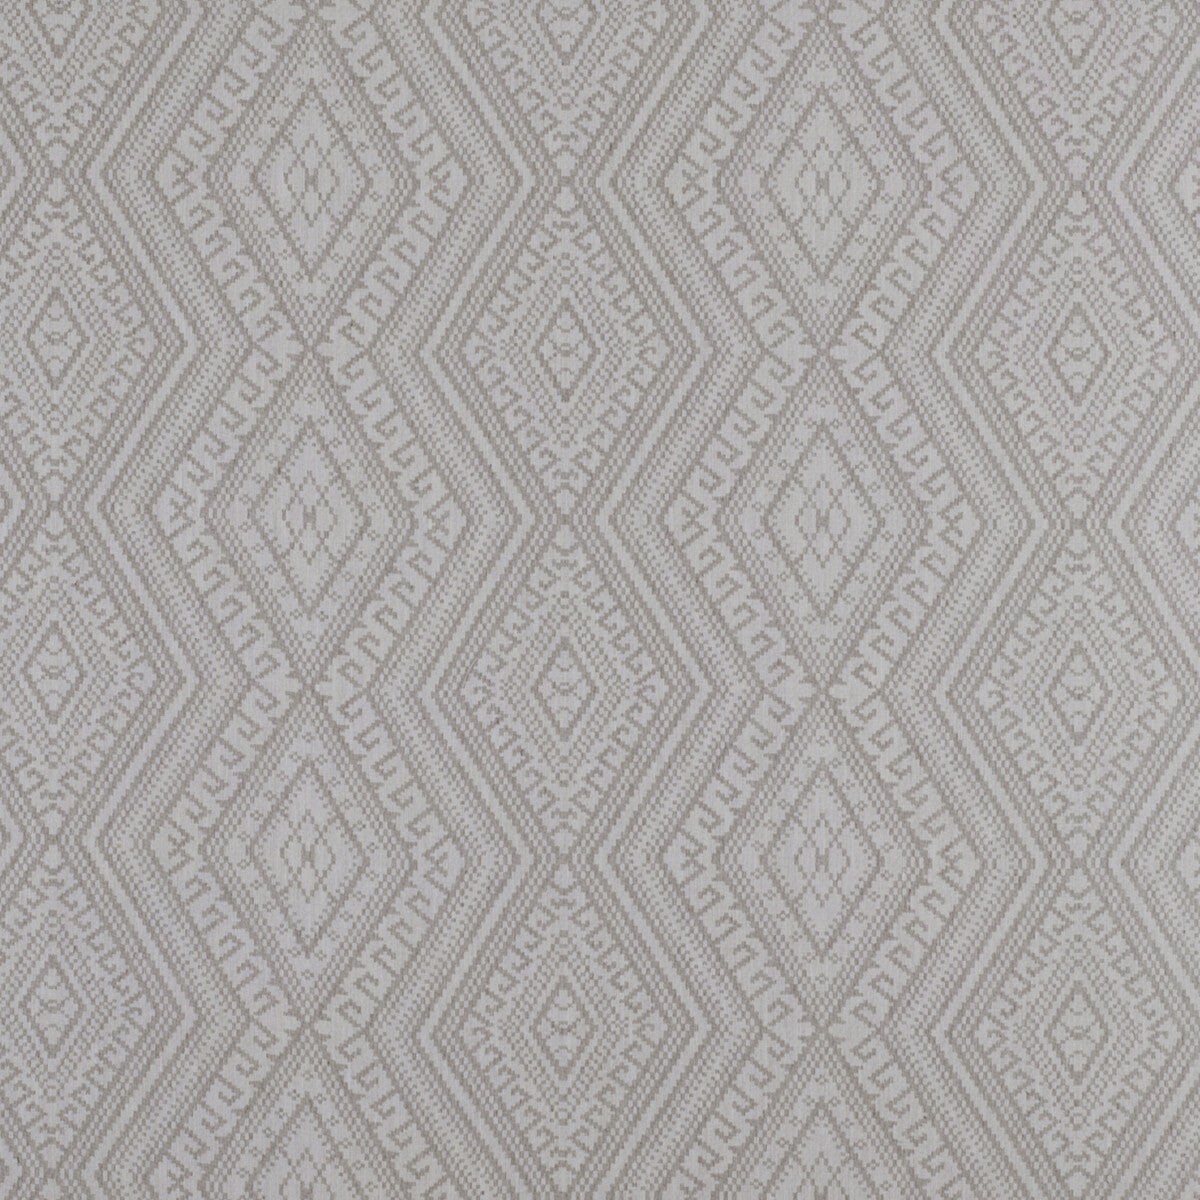 Estromboli fabric in piedra color - pattern GDT5313.004.0 - by Gaston y Daniela in the Tierras collection